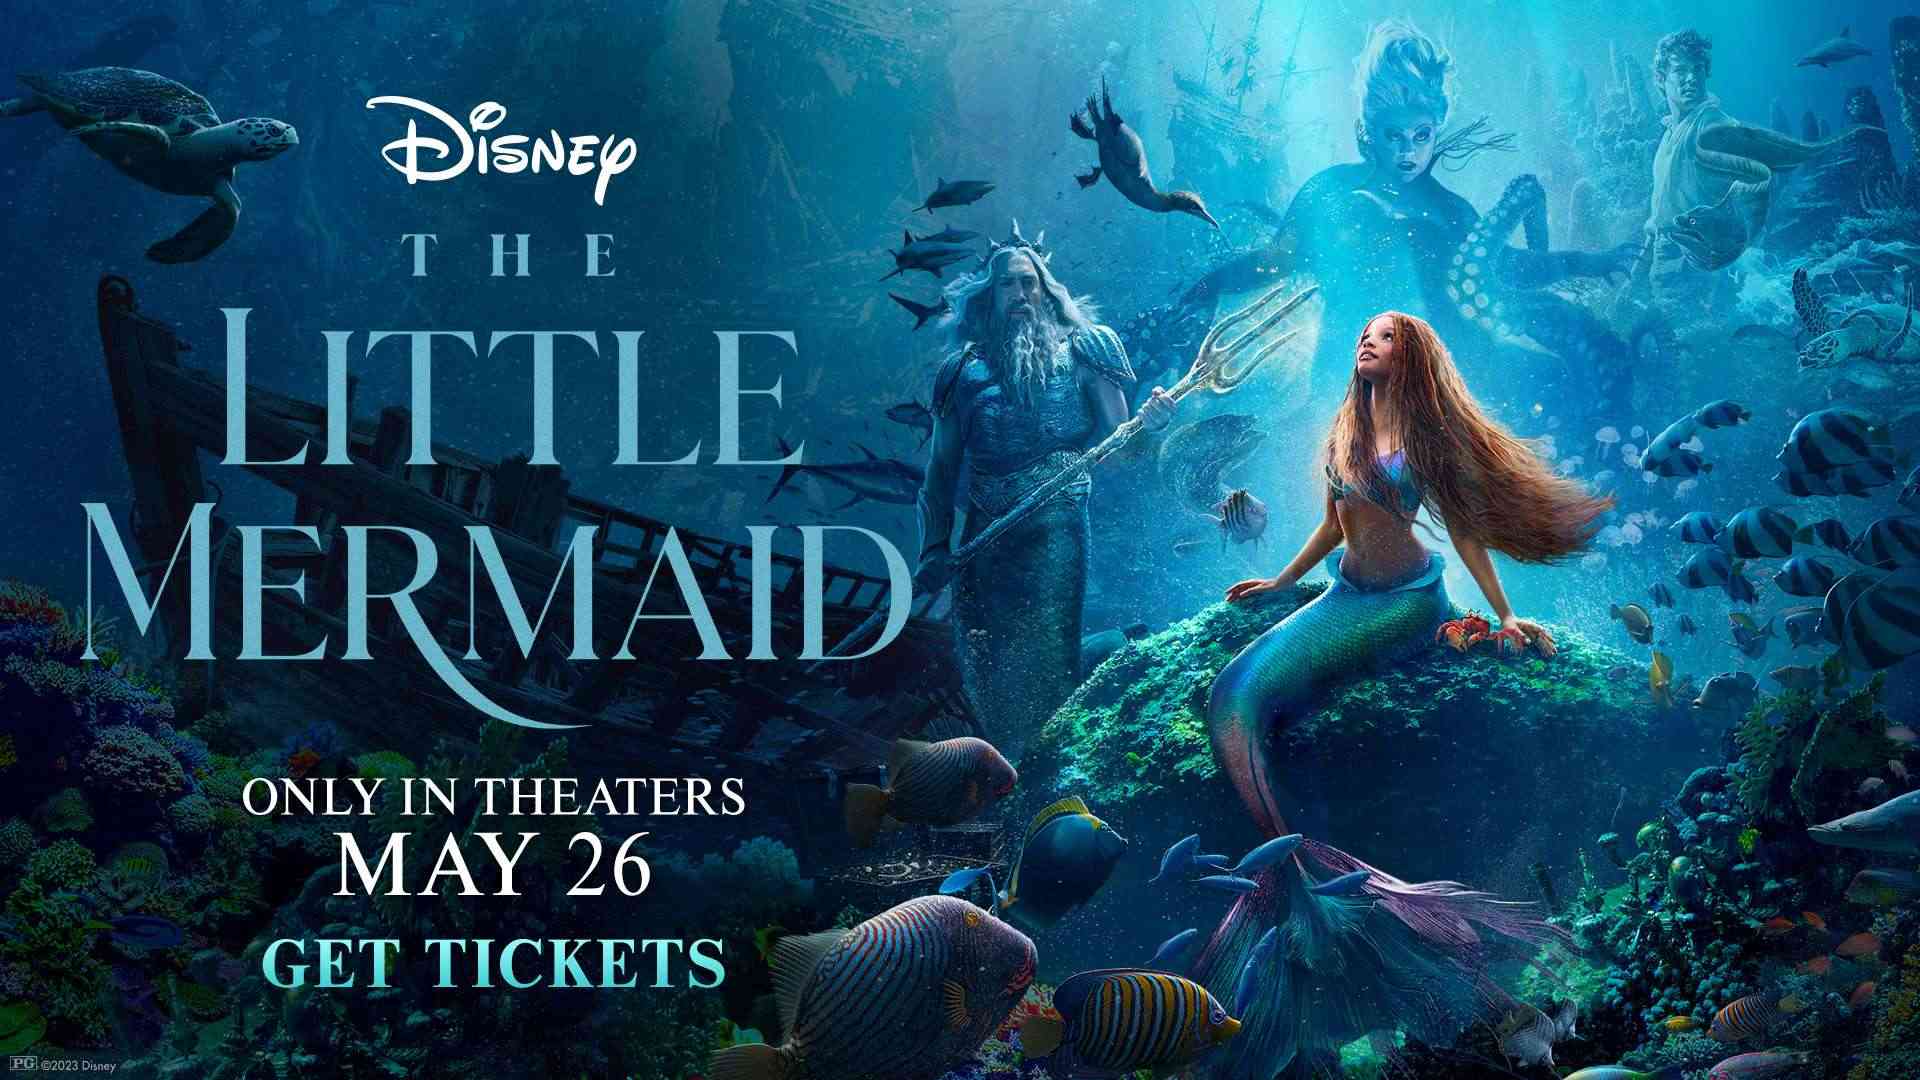 The Little Mermaid received mixed reviews after its release